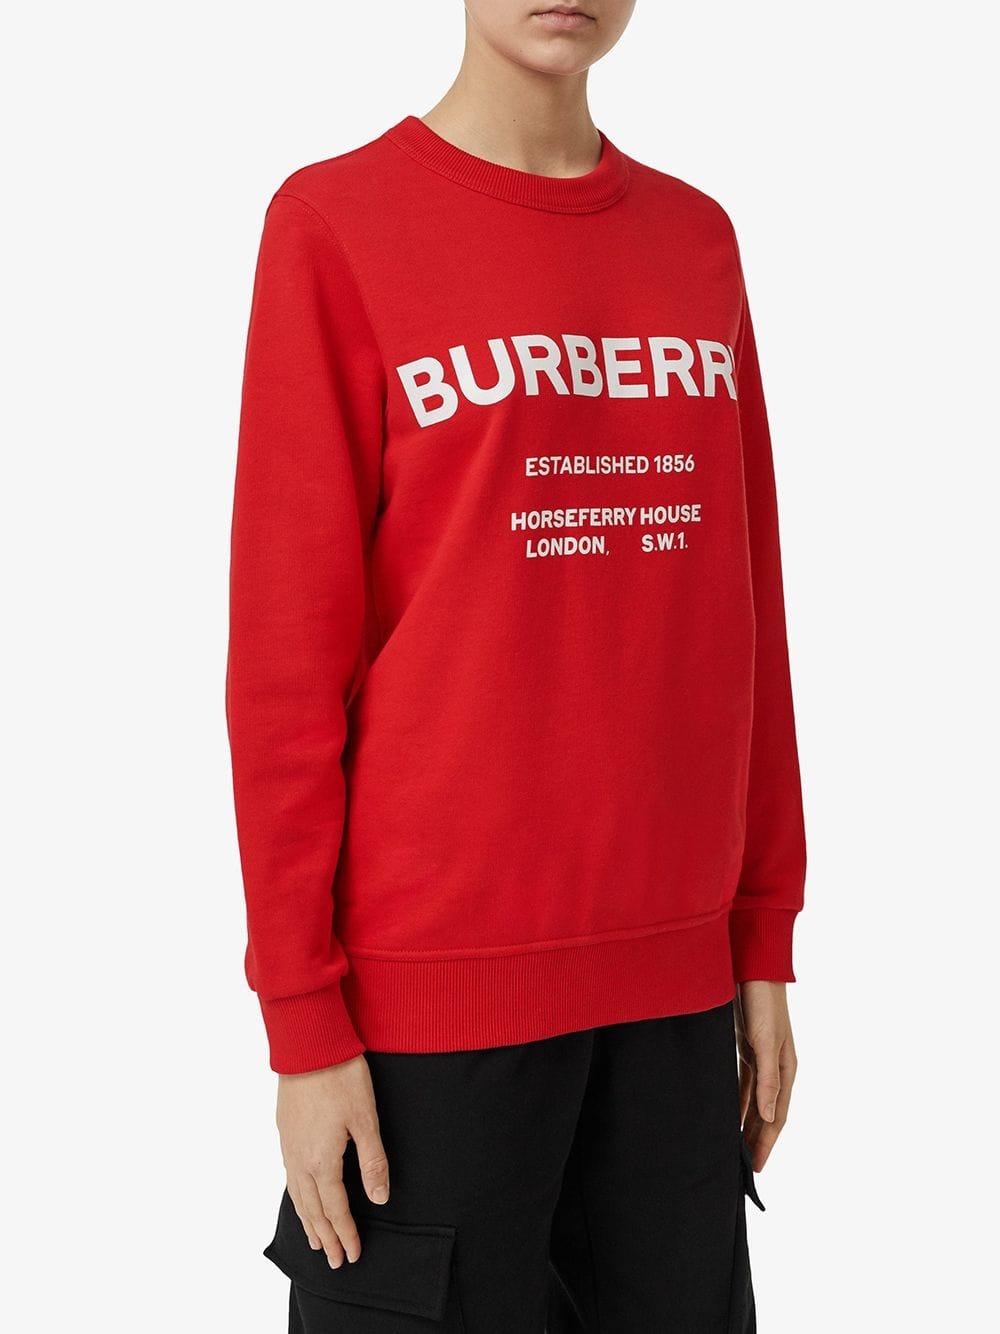 Burberry Horseferry Print Cotton Sweatshirt in Red - Lyst